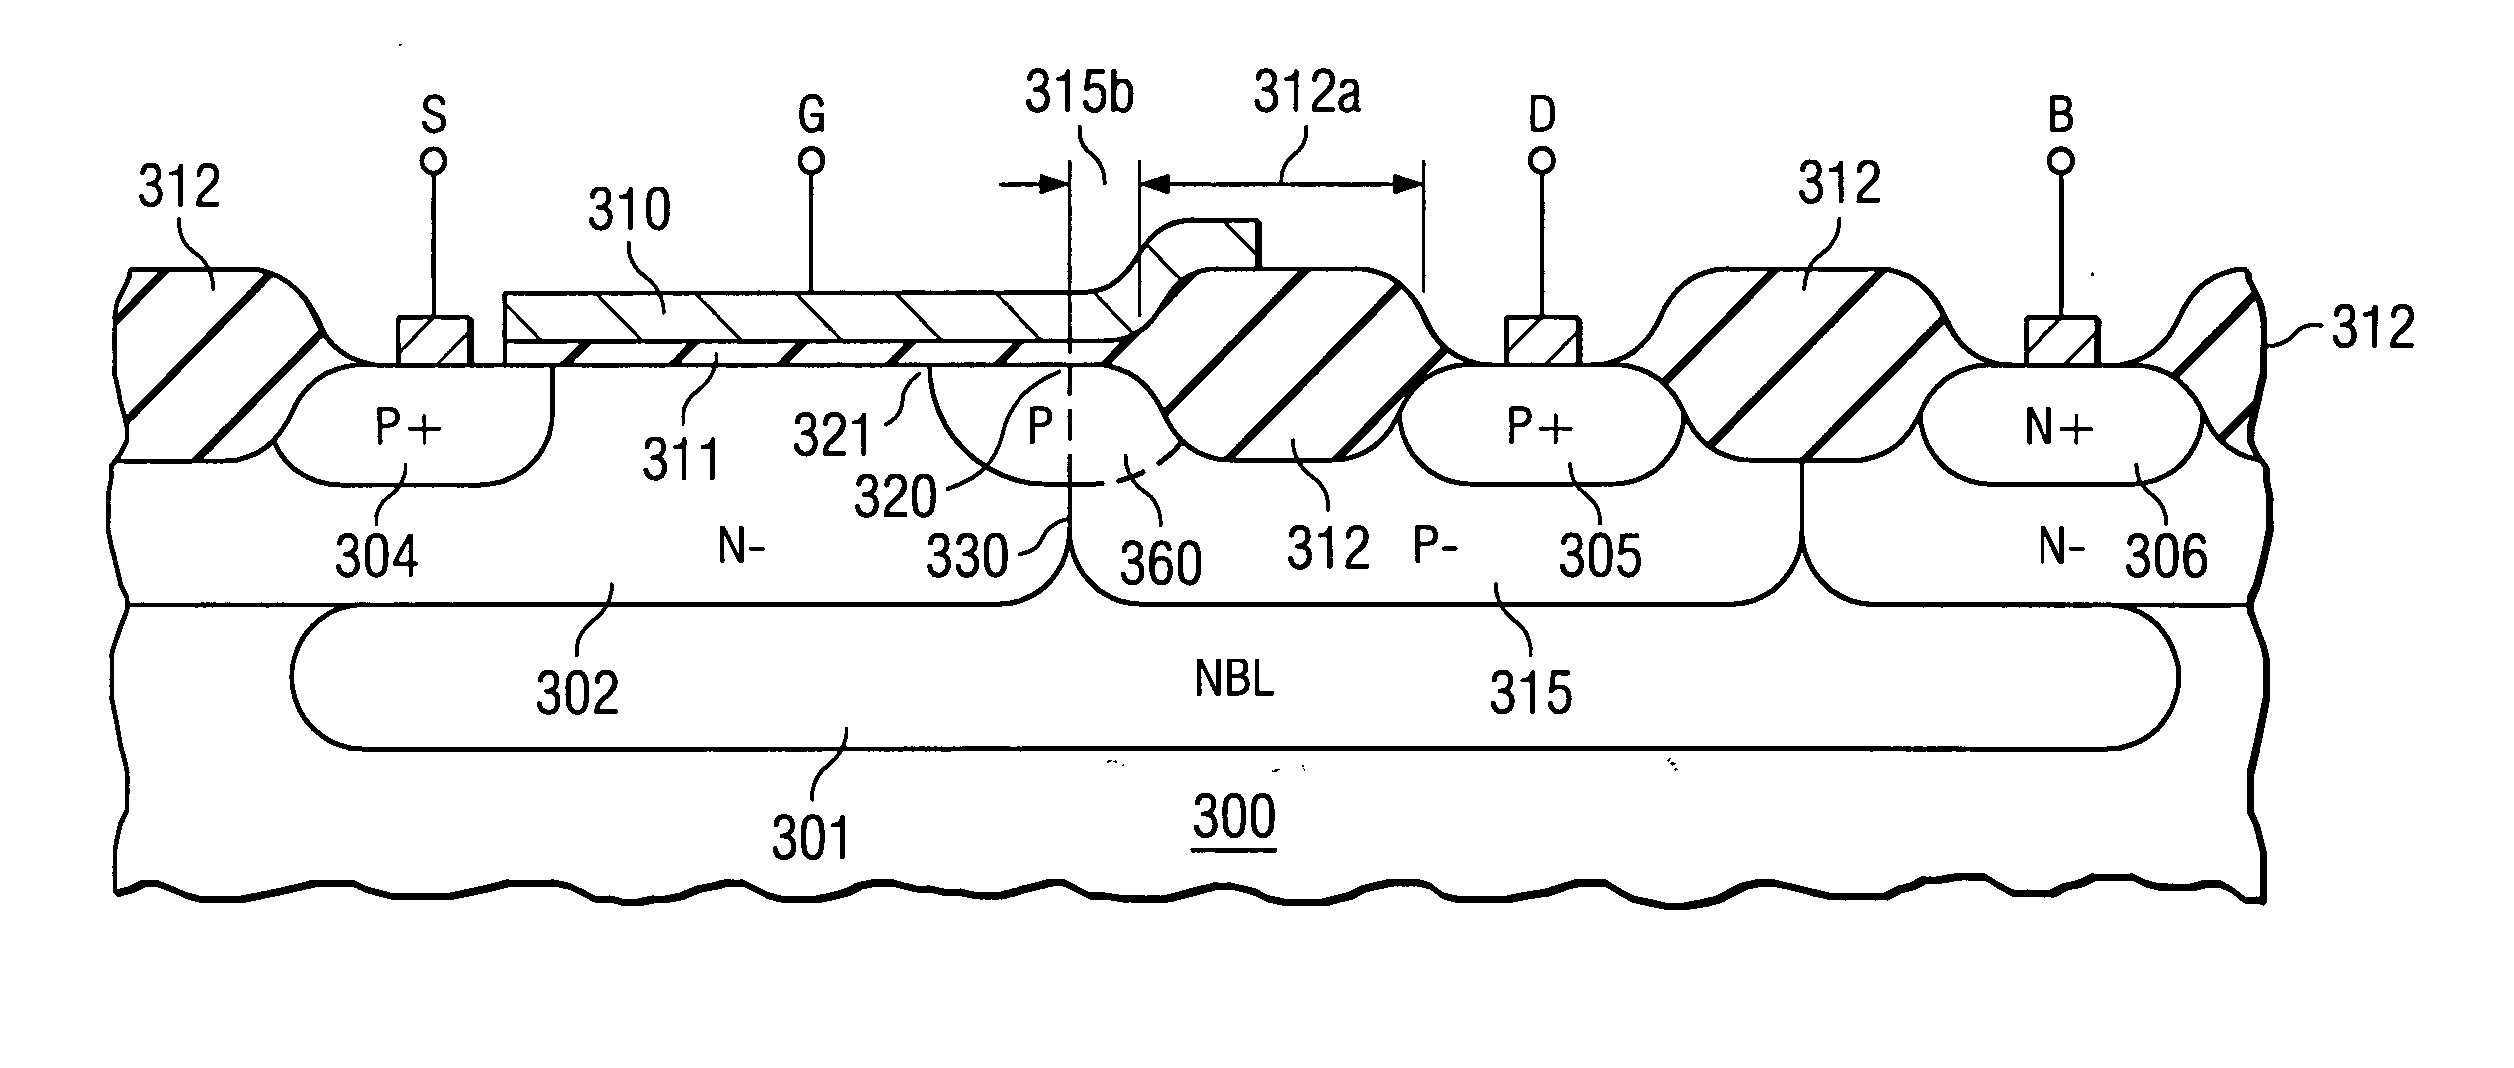 Low cost fabrication method for high voltage, high drain current MOS transistor